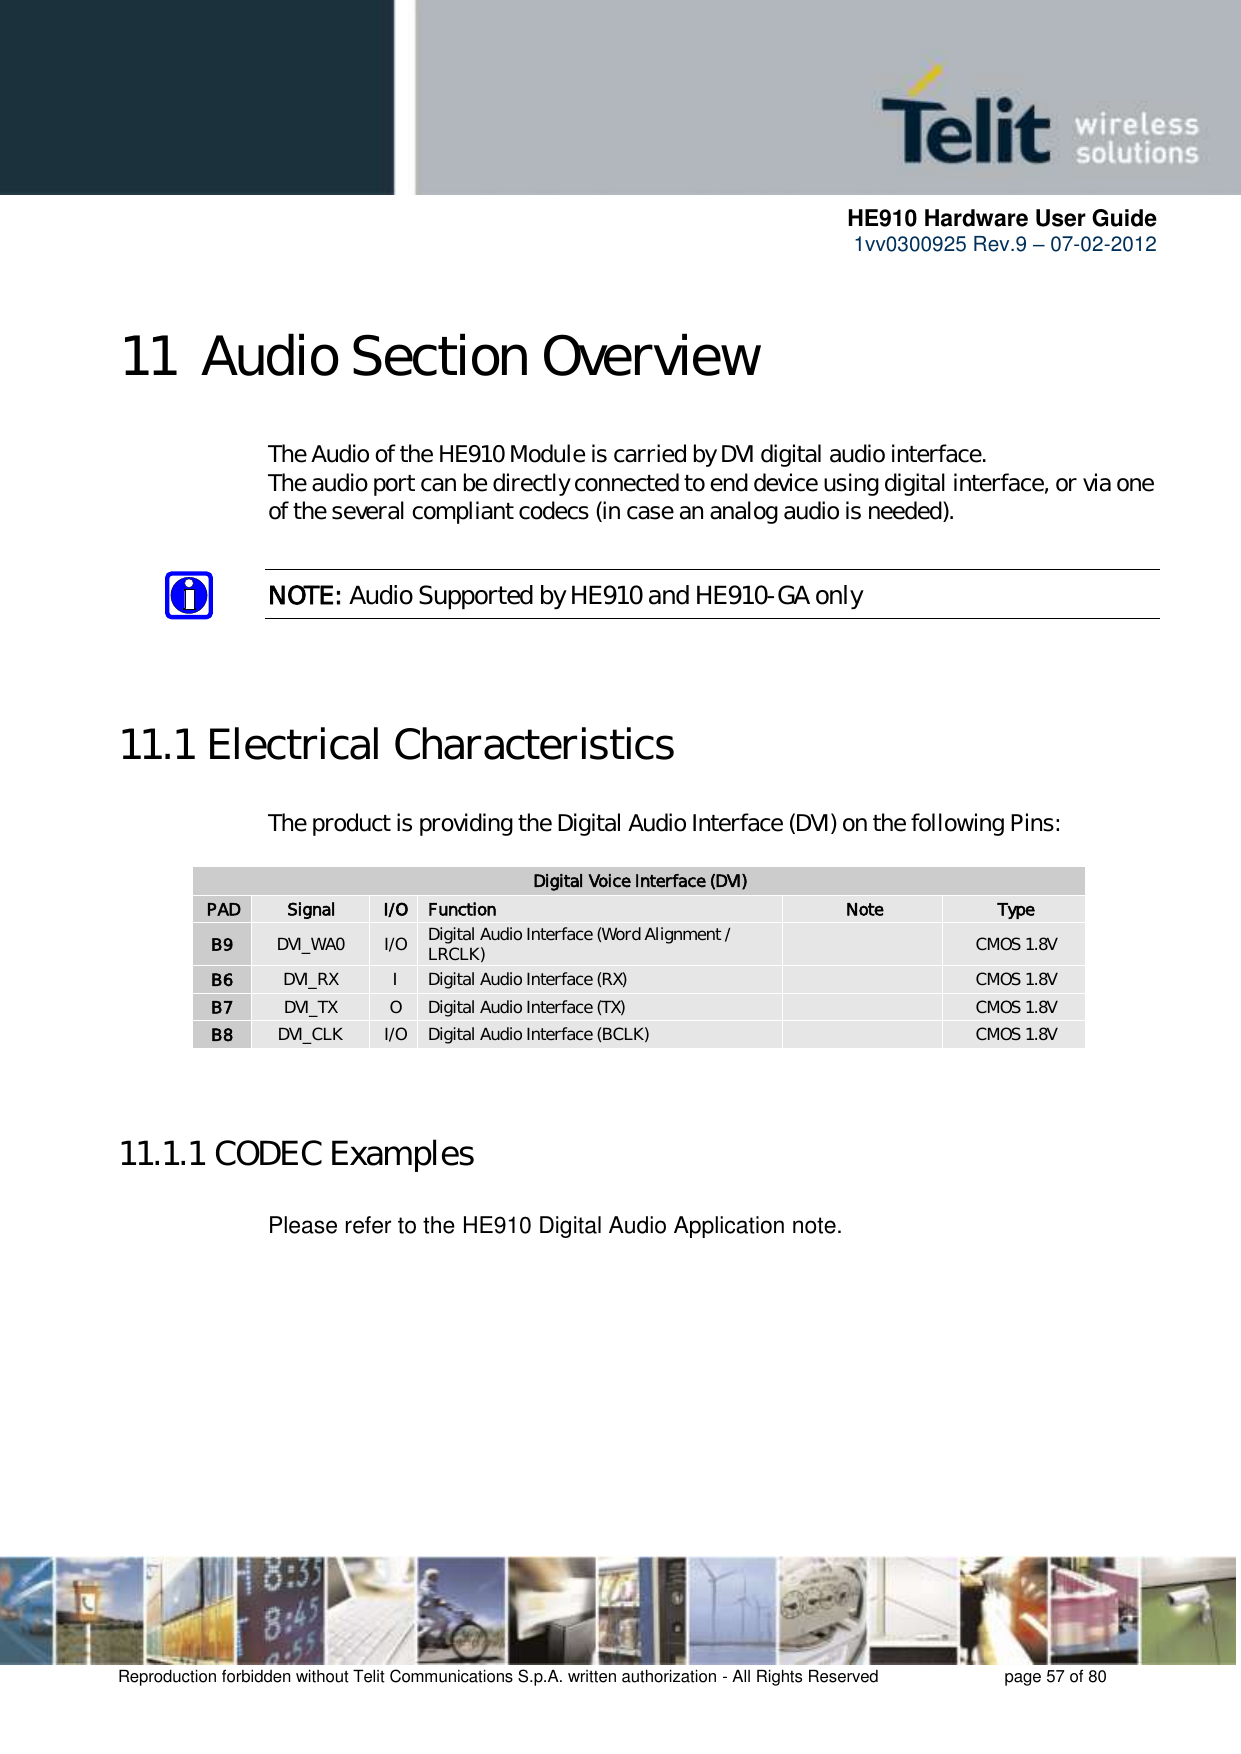      HE910 Hardware User Guide 1vv0300925 Rev.9 – 07-02-2012    Reproduction forbidden without Telit Communications S.p.A. written authorization - All Rights Reserved    page 57 of 80   11 Audio Section Overview  The Audio of the HE910 Module is carried by DVI digital audio interface. The audio port can be directly connected to end device using digital interface, or via one of the several compliant codecs (in case an analog audio is needed).  NOTE: Audio Supported by HE910 and HE910-GA only   11.1 Electrical Characteristics The product is providing the Digital Audio Interface (DVI) on the following Pins:  Digital Voice Interface (DVI) PAD Signal I/O Function Note Type B9 DVI_WA0 I/O Digital Audio Interface (Word Alignment / LRCLK)  CMOS 1.8V B6 DVI_RX I Digital Audio Interface (RX)  CMOS 1.8V B7 DVI_TX O Digital Audio Interface (TX)  CMOS 1.8V B8 DVI_CLK I/O Digital Audio Interface (BCLK)  CMOS 1.8V   11.1.1 CODEC Examples  Please refer to the HE910 Digital Audio Application note. 